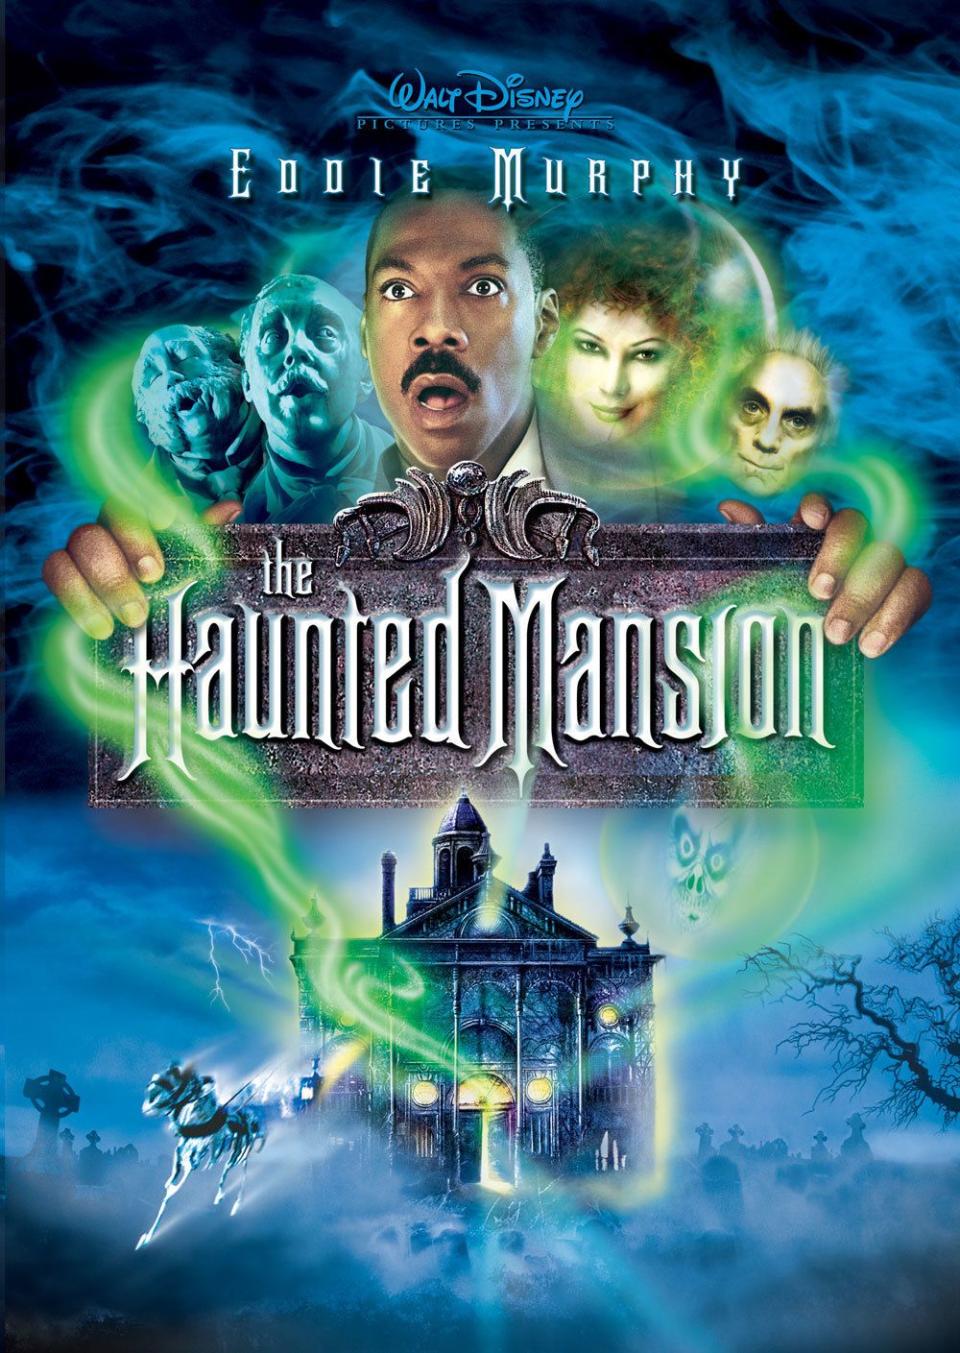 17) The Haunted Mansion (2003)